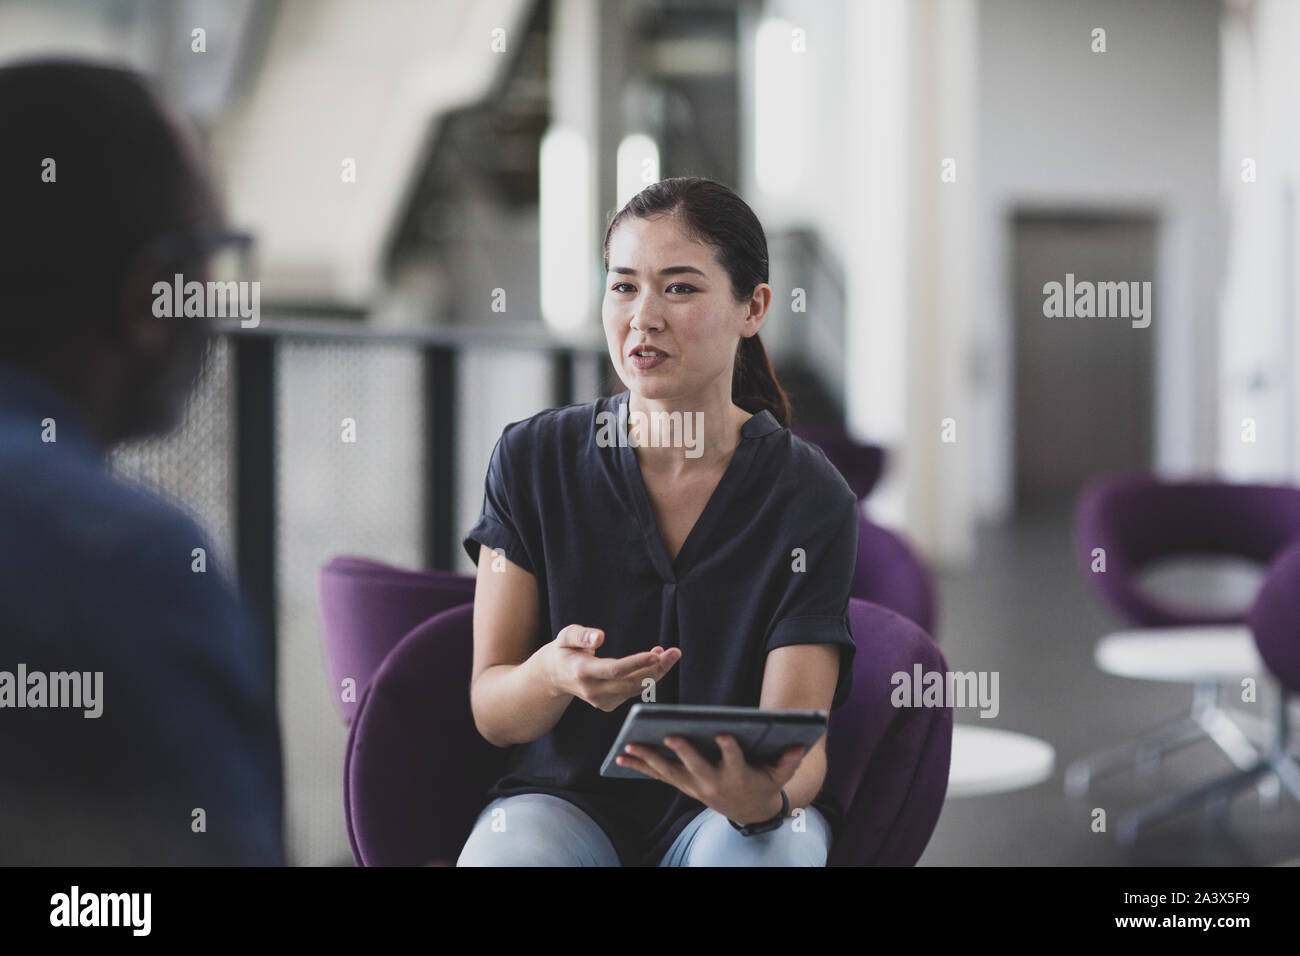 Businesswoman using a digital tablet in a meeting Stock Photo